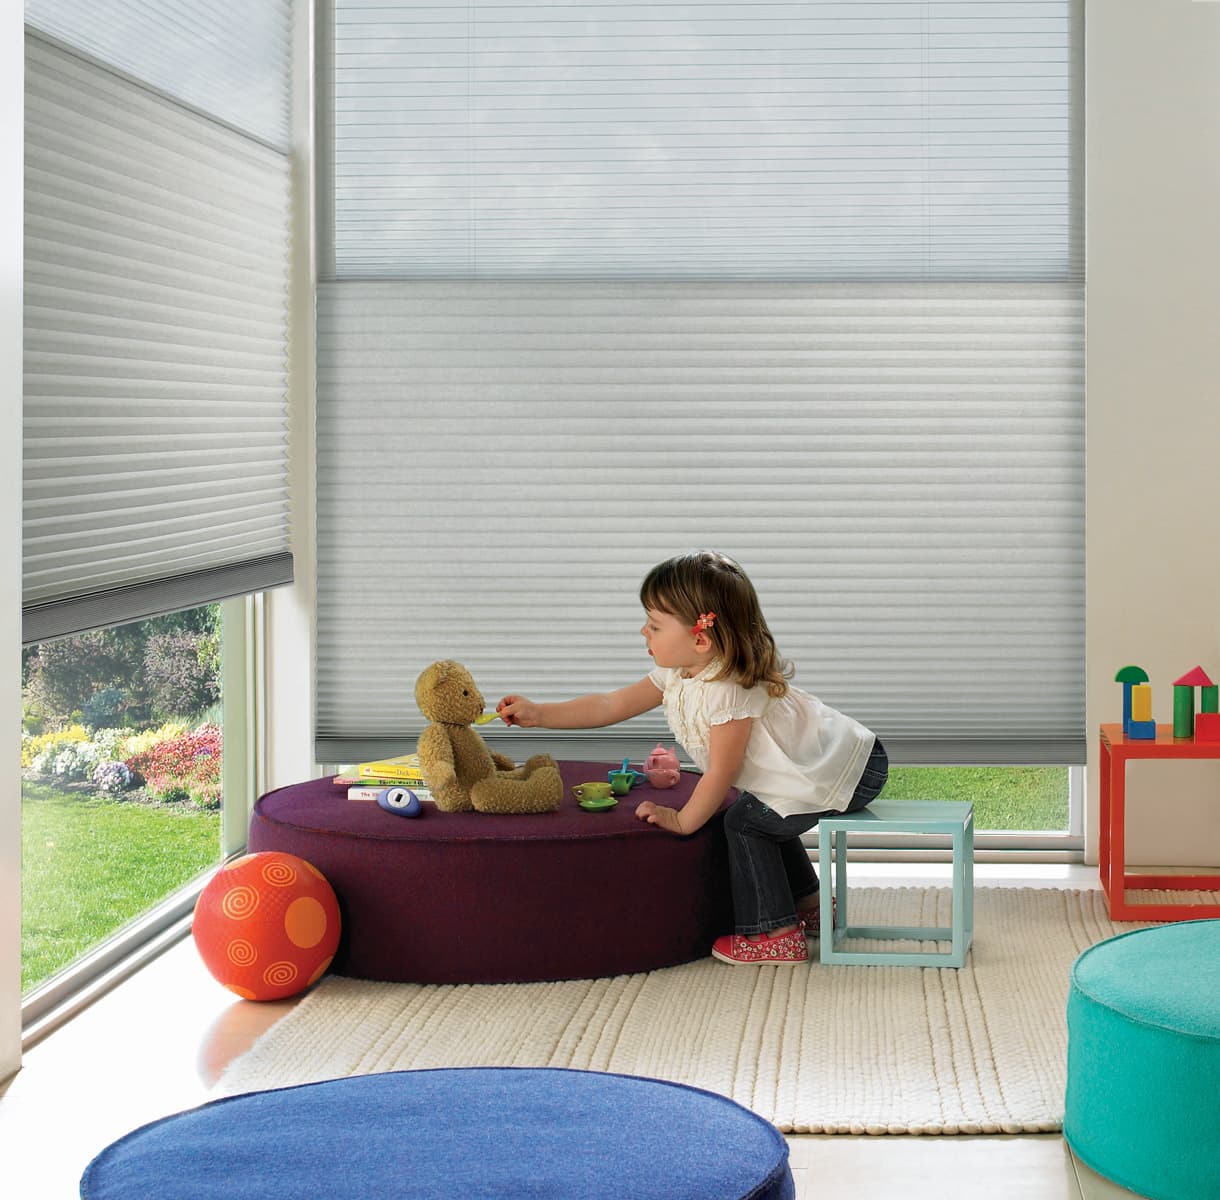 Kid-safe Duette Honeycomb Shades